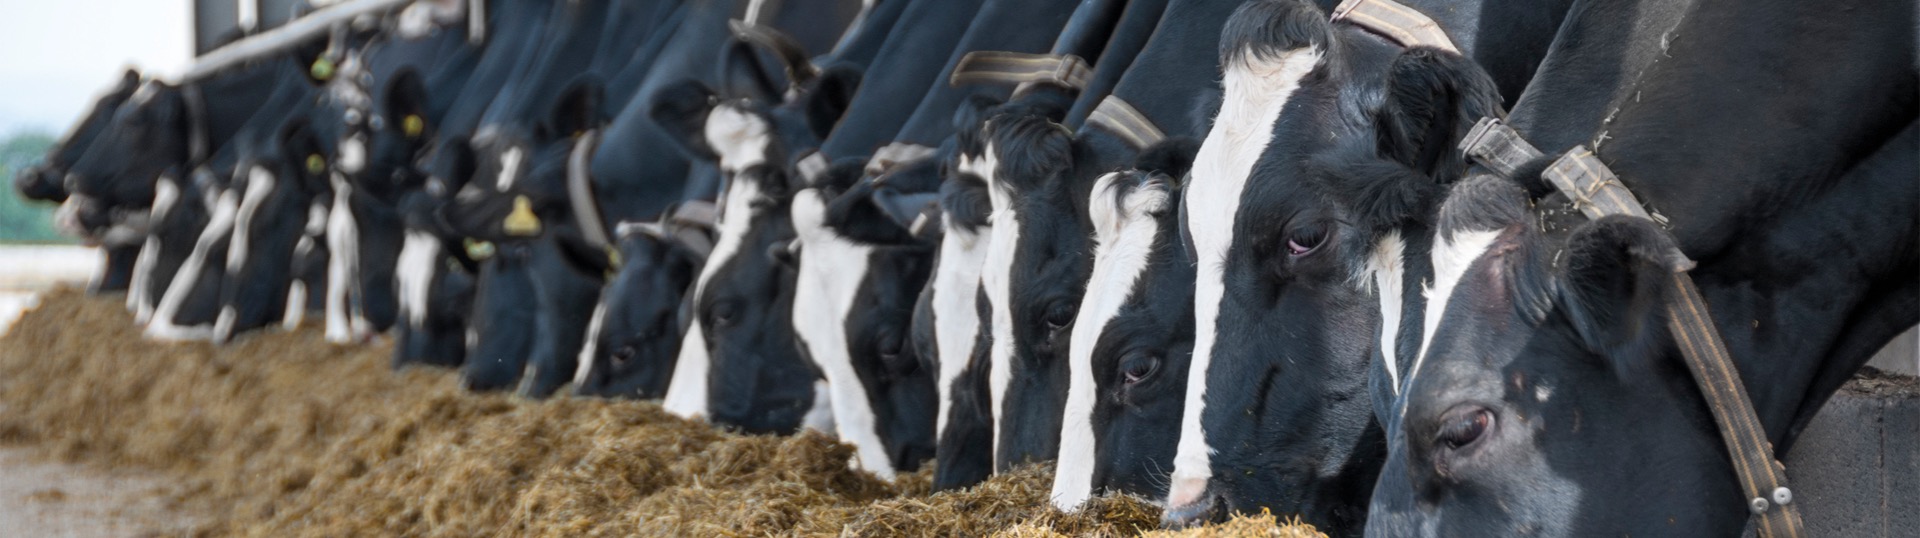 Feed the rumen microbes for improved feed efficiency